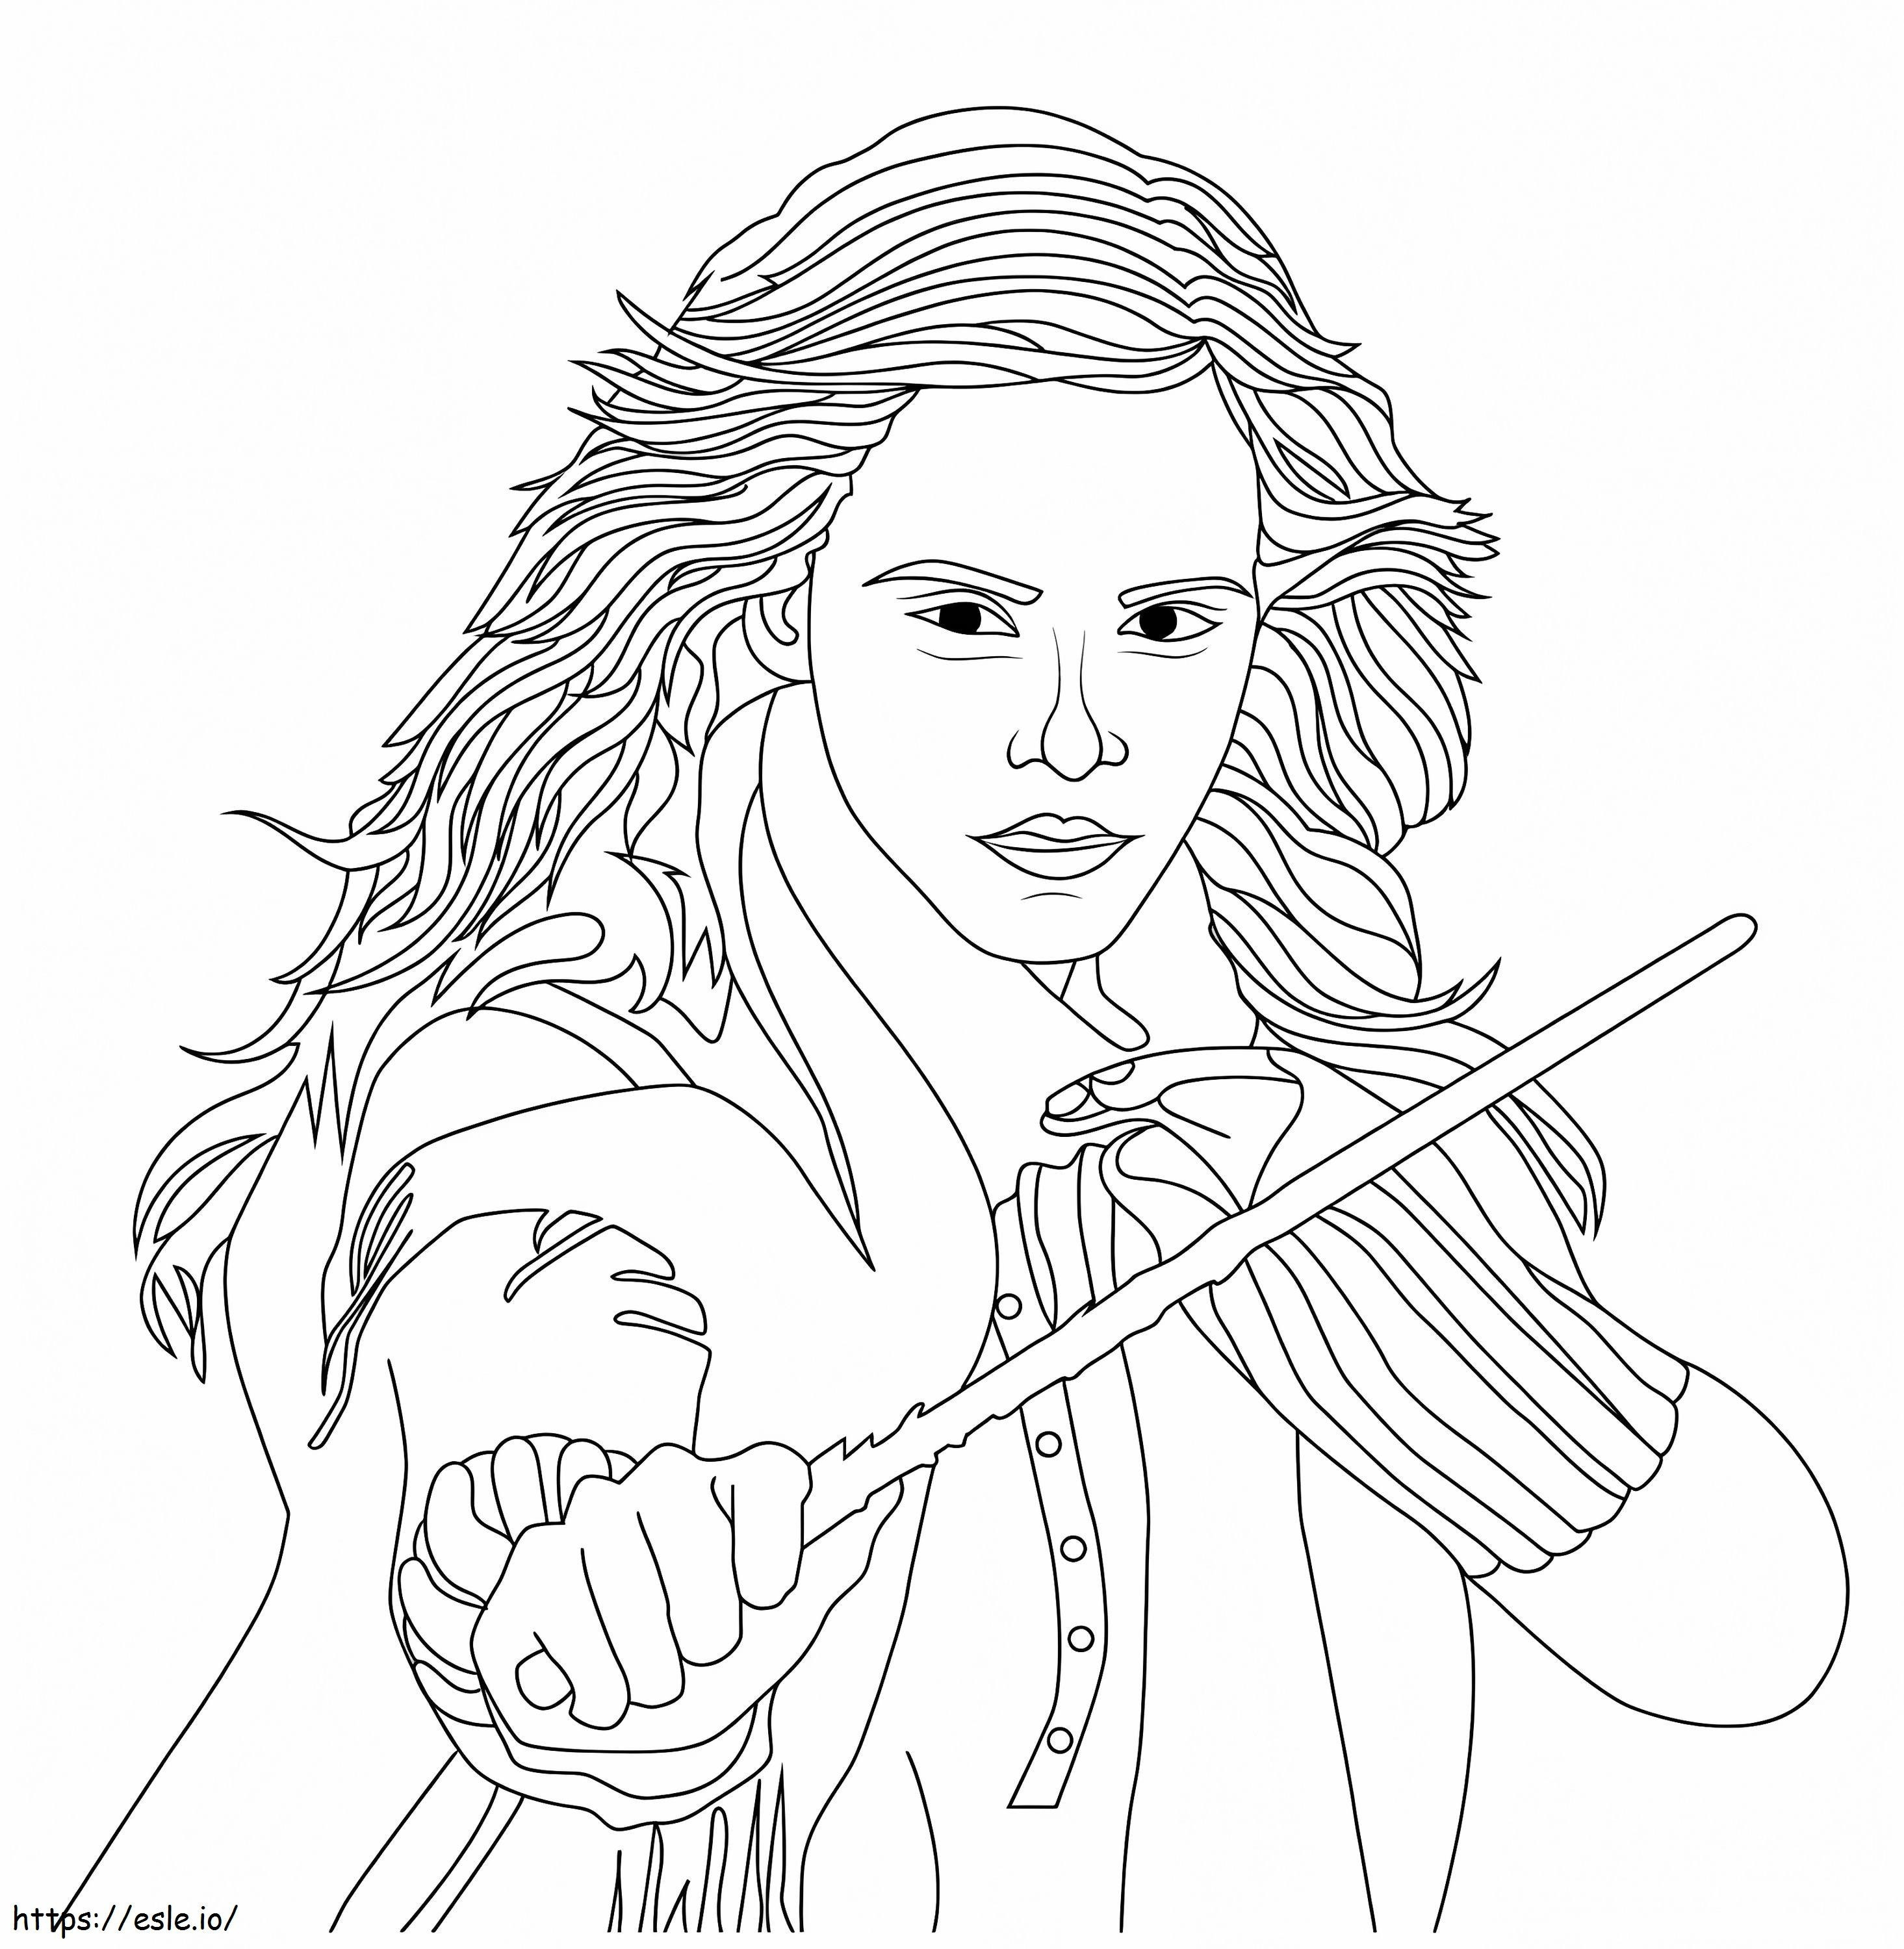 Awesome Hermione coloring page